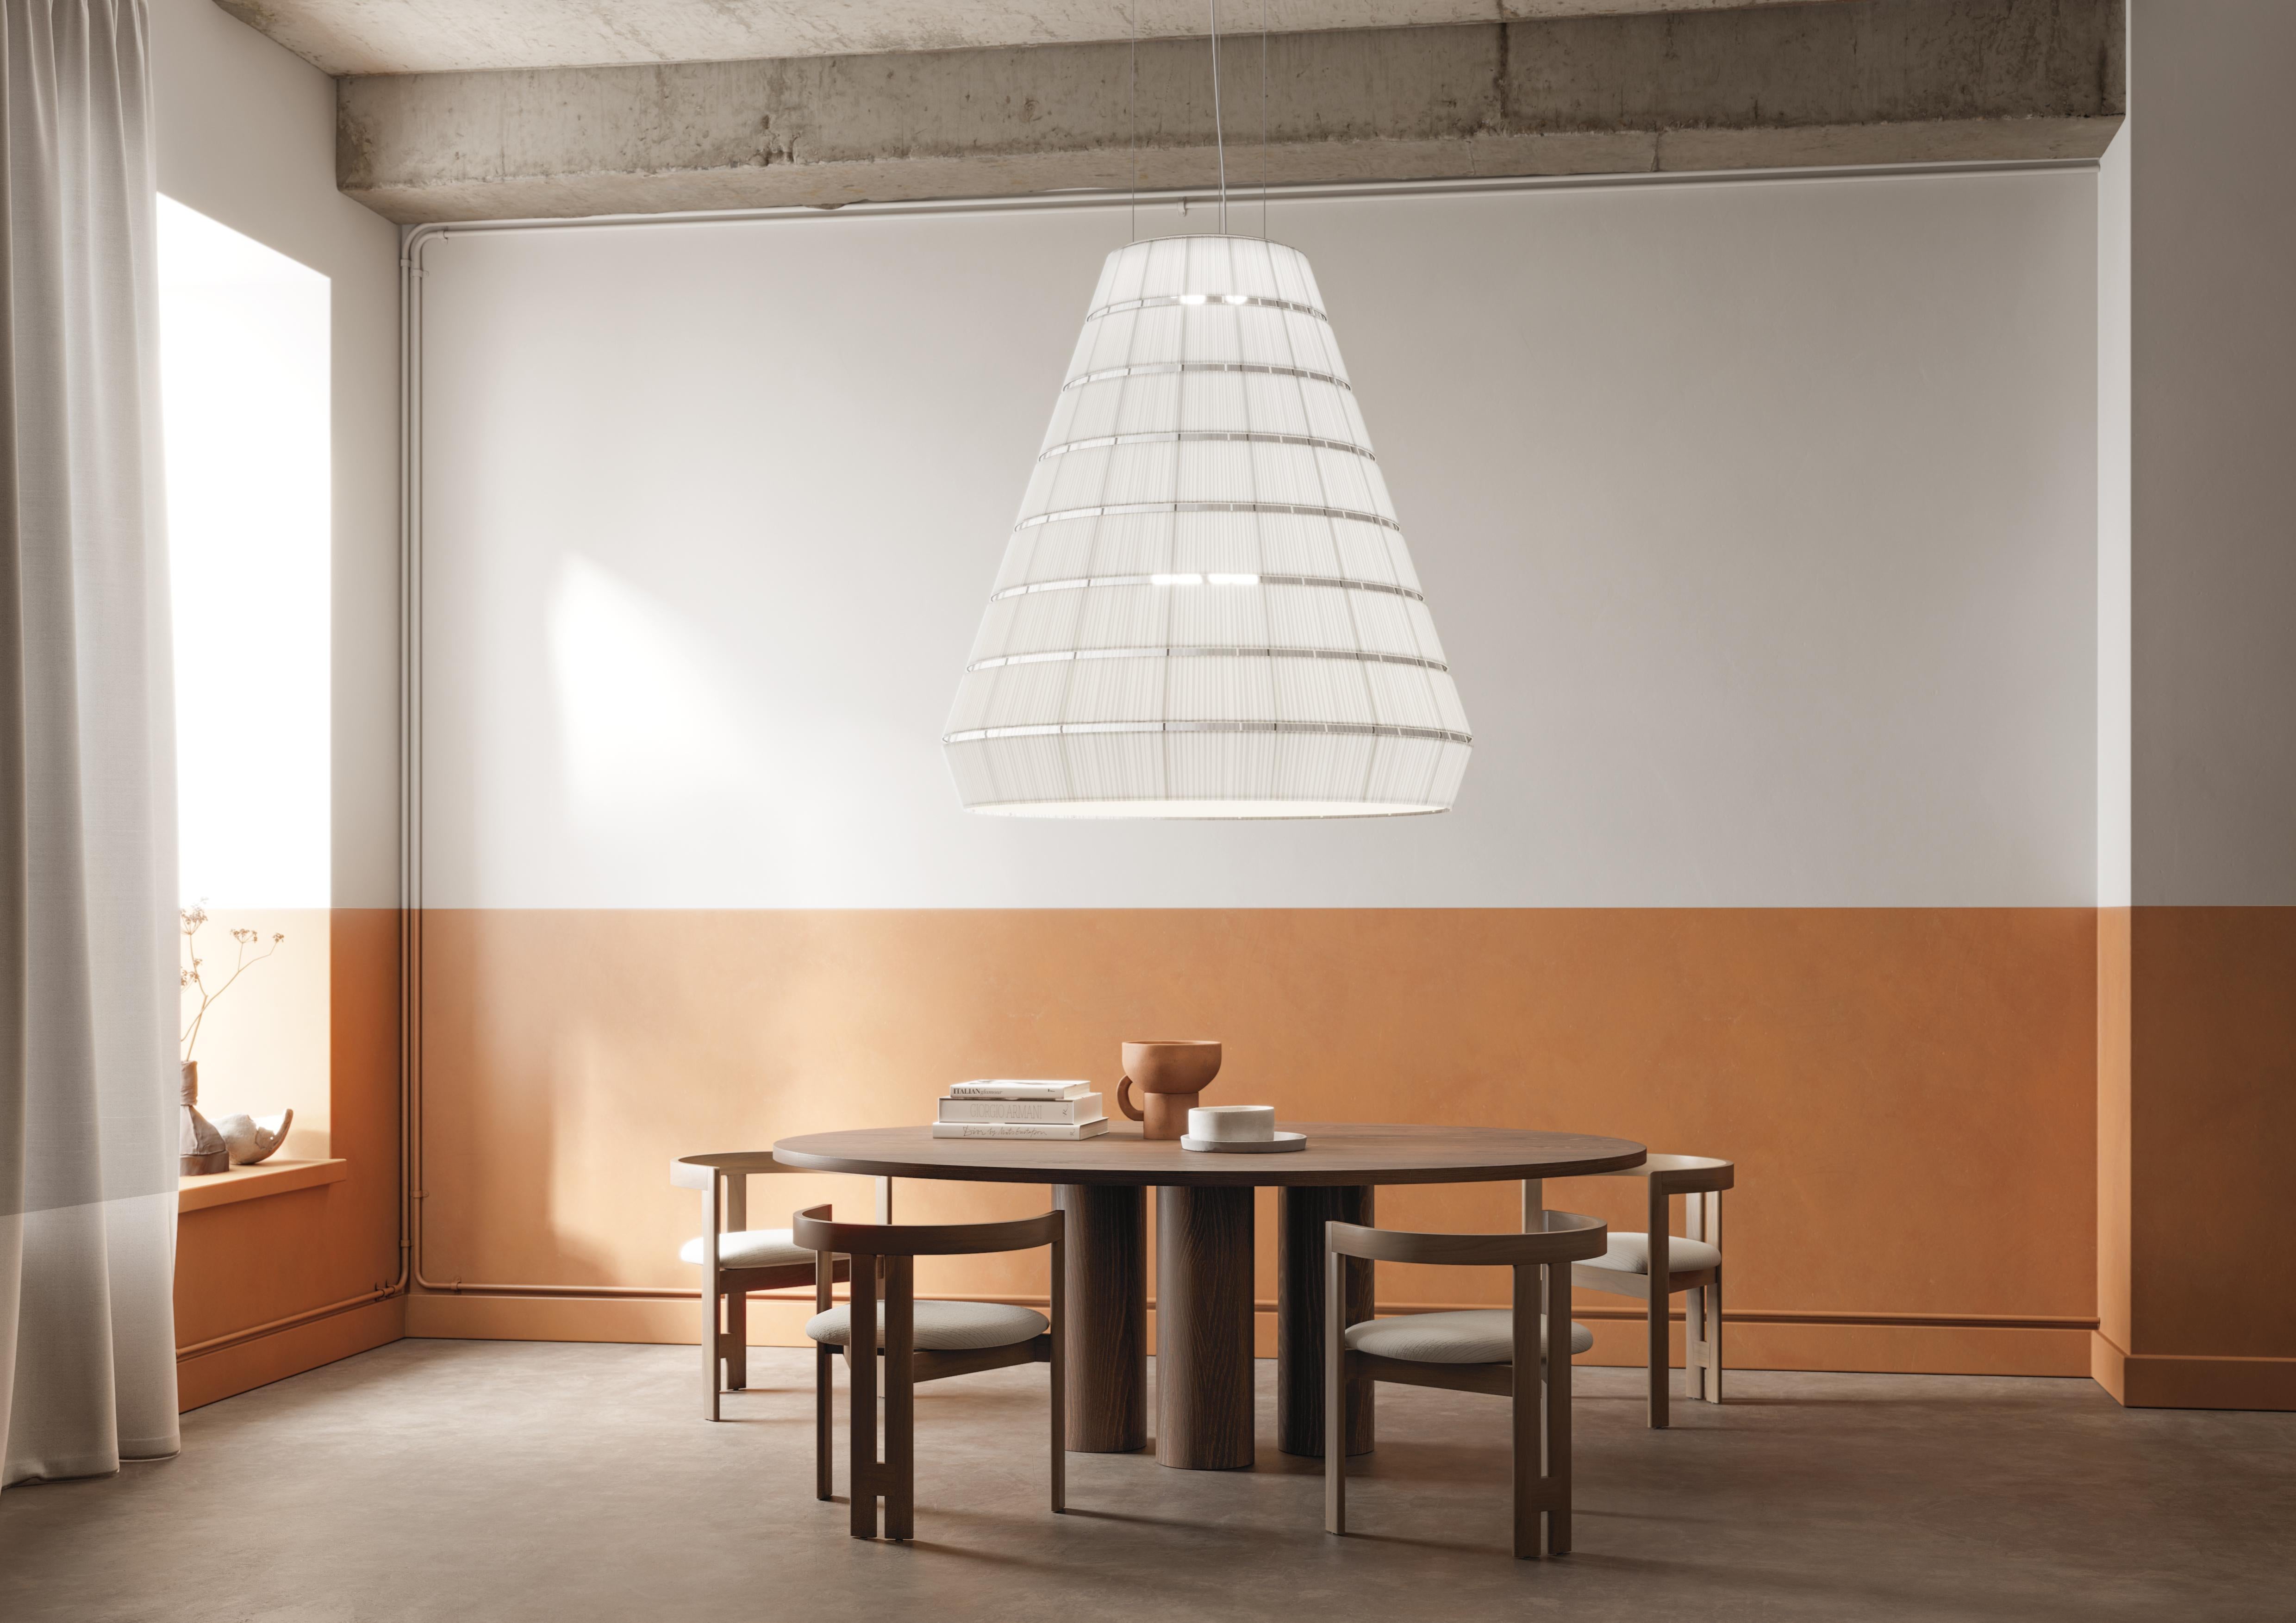 Axolight Layers Type A Pendant Lamp in White Steel by Vanessa Vivian

Layers is a collection of suspension lamps with a strong sculptural presence, obtained through combinations of different geometric shapes. Its layered system is modular, which